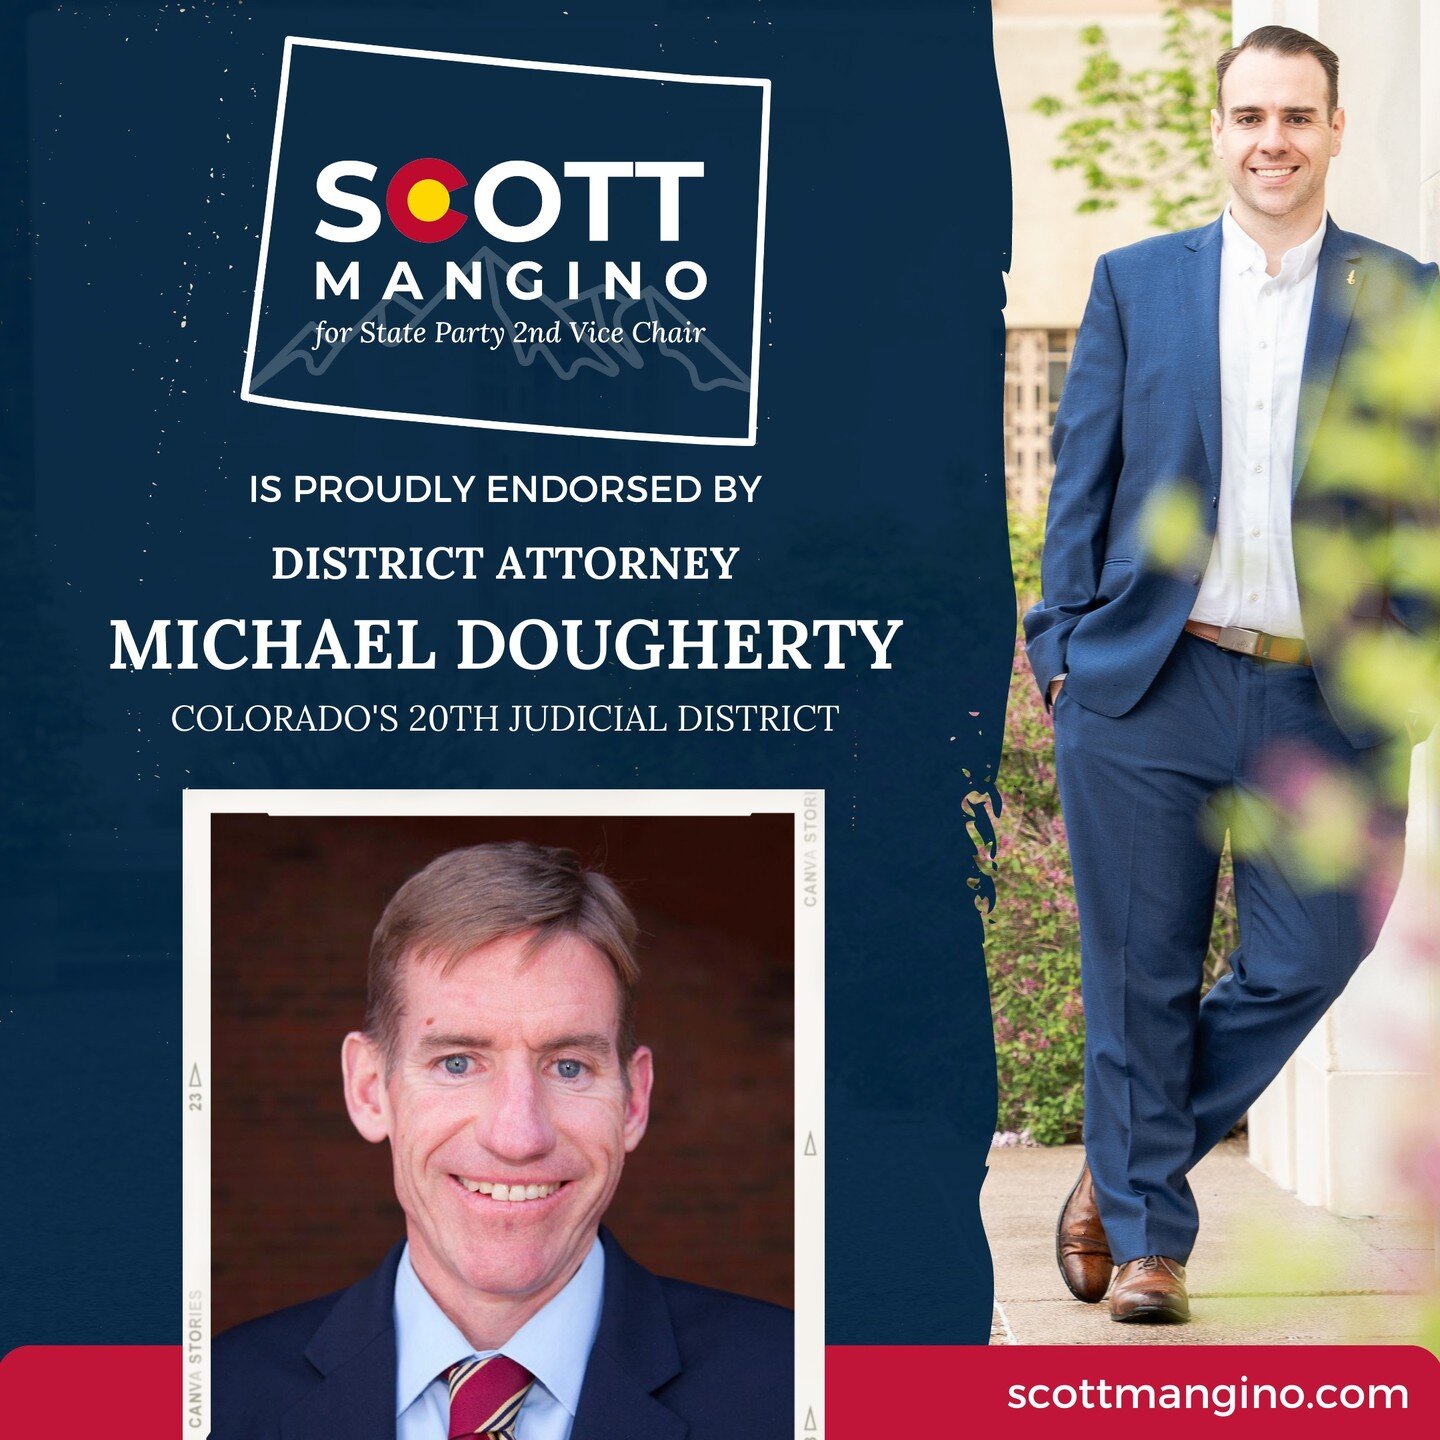 Fighting to safeguard our communities &amp; our rights isn't just fought in the Capitol or City Hall. It's also fought by our DAs &amp; their team of civil servants every single day. I'm proud to have the endorsement of @dadoughertyco - prosecutor, e